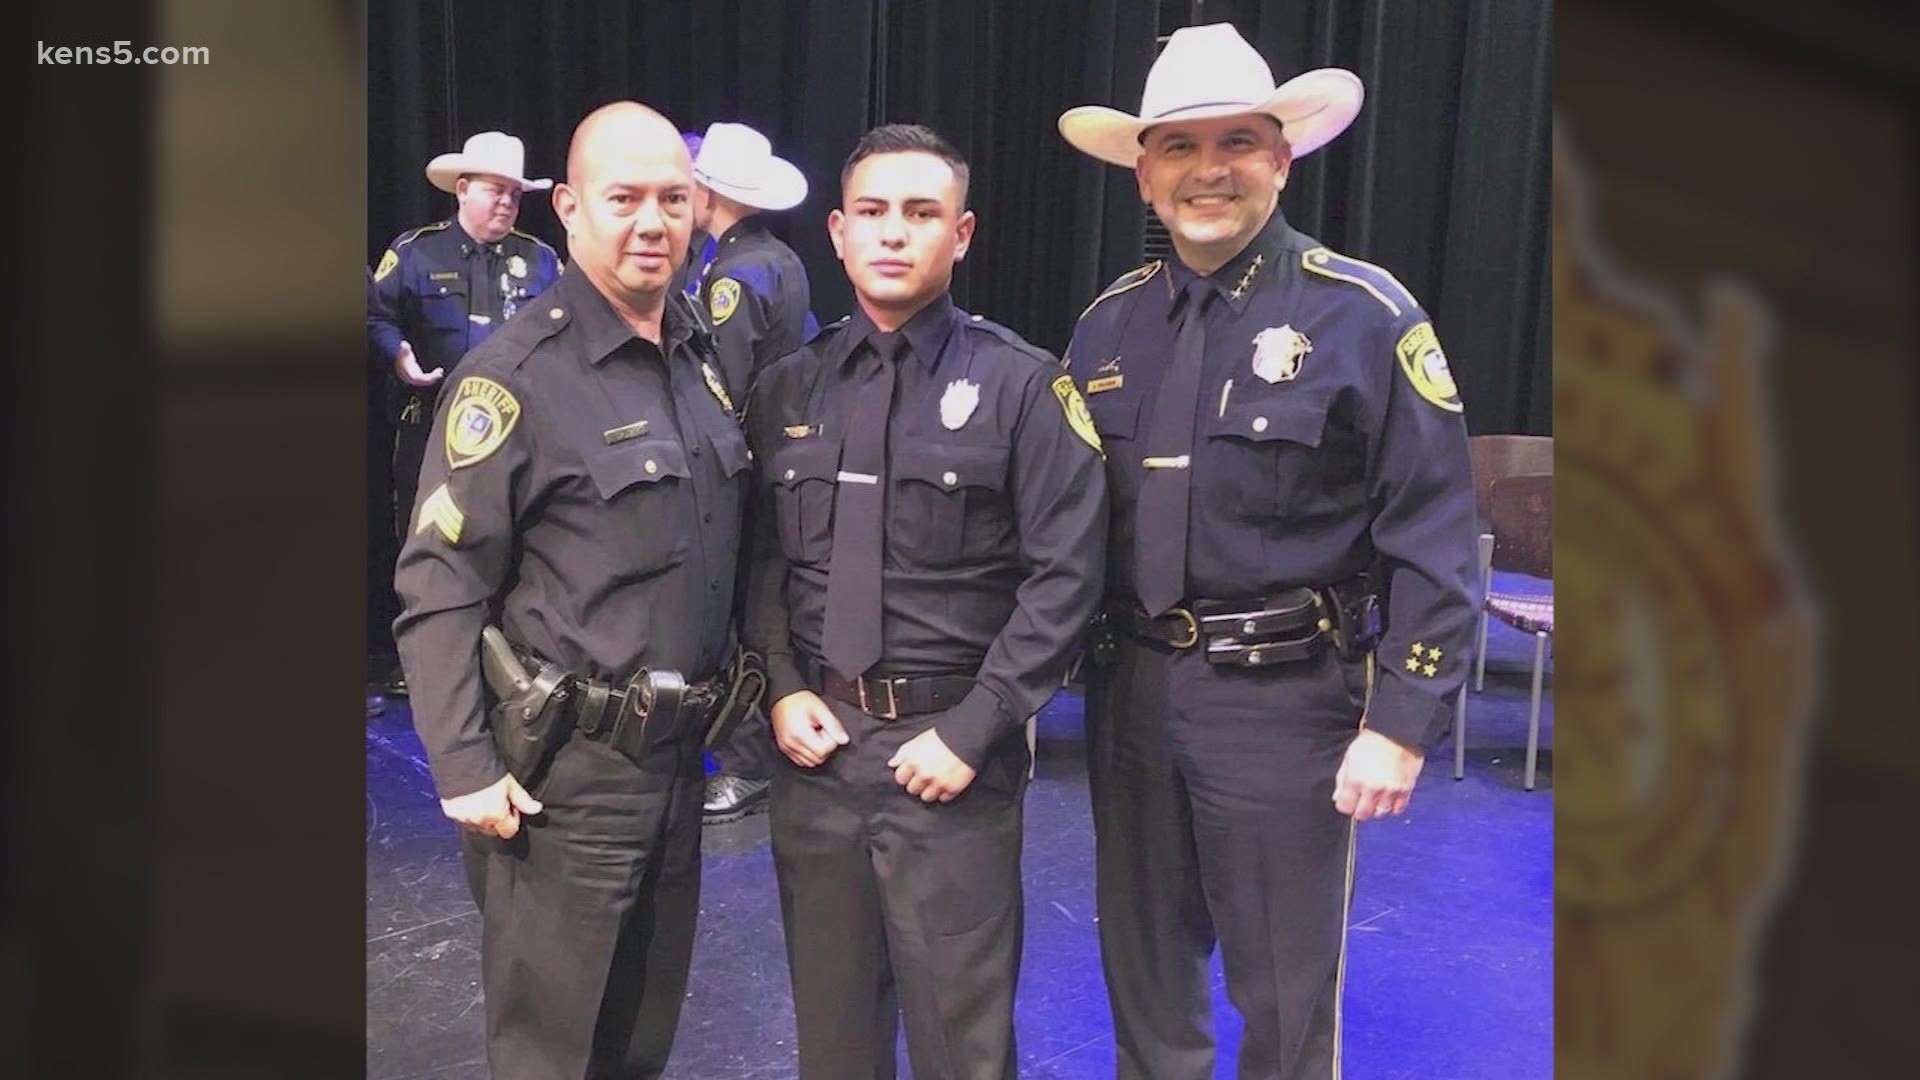 Deputy Noah Calderon and his fiancee were killed in a crash overnight, sources at the Bexar County Sheriff's Office and San Patricio County Sheriff Oscar Rivera say.